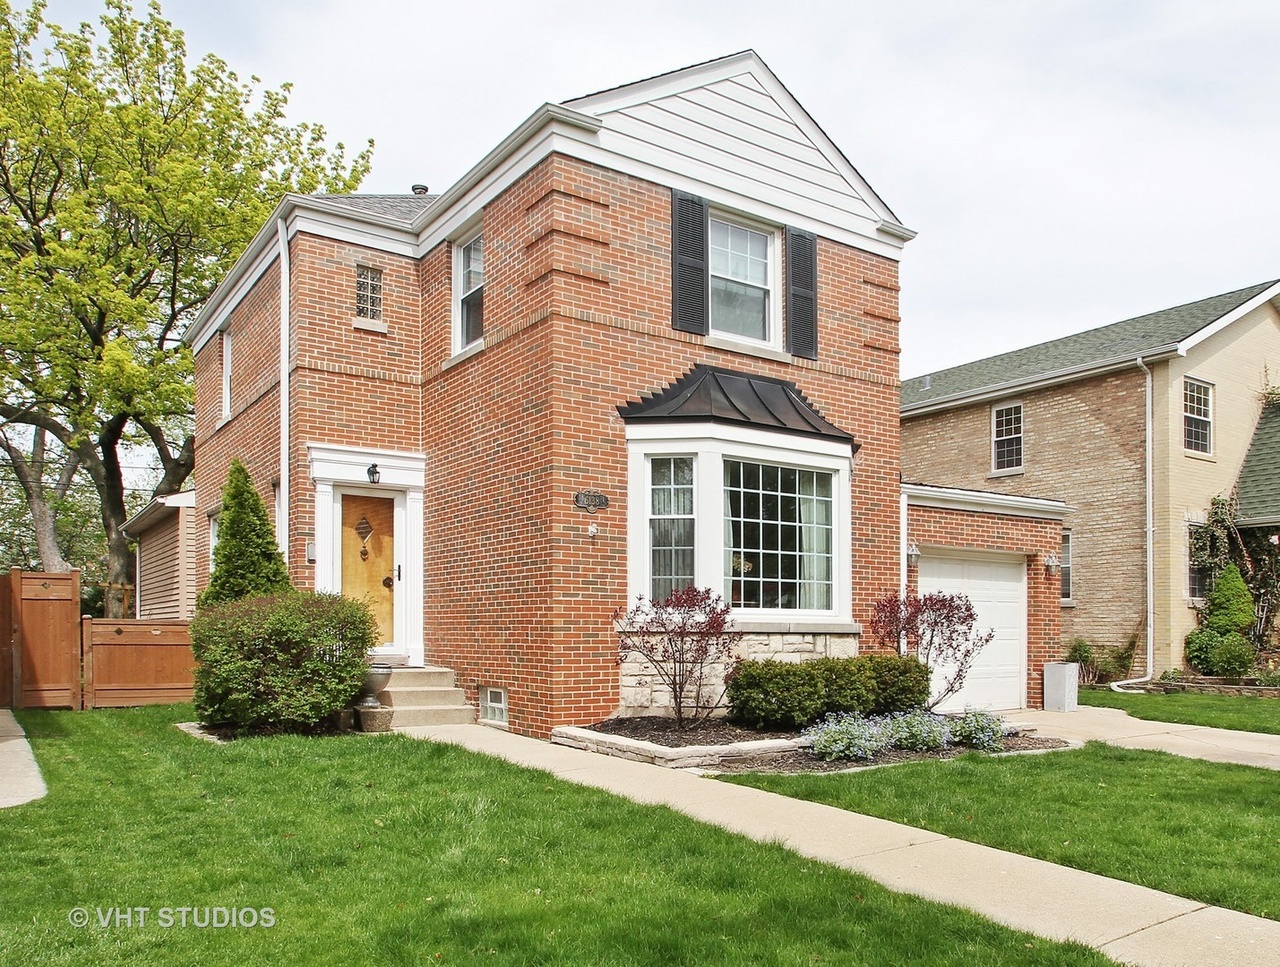 6138 N Leader Ave, Chicago, IL 60646 | MLS# 09610263 | Redfin